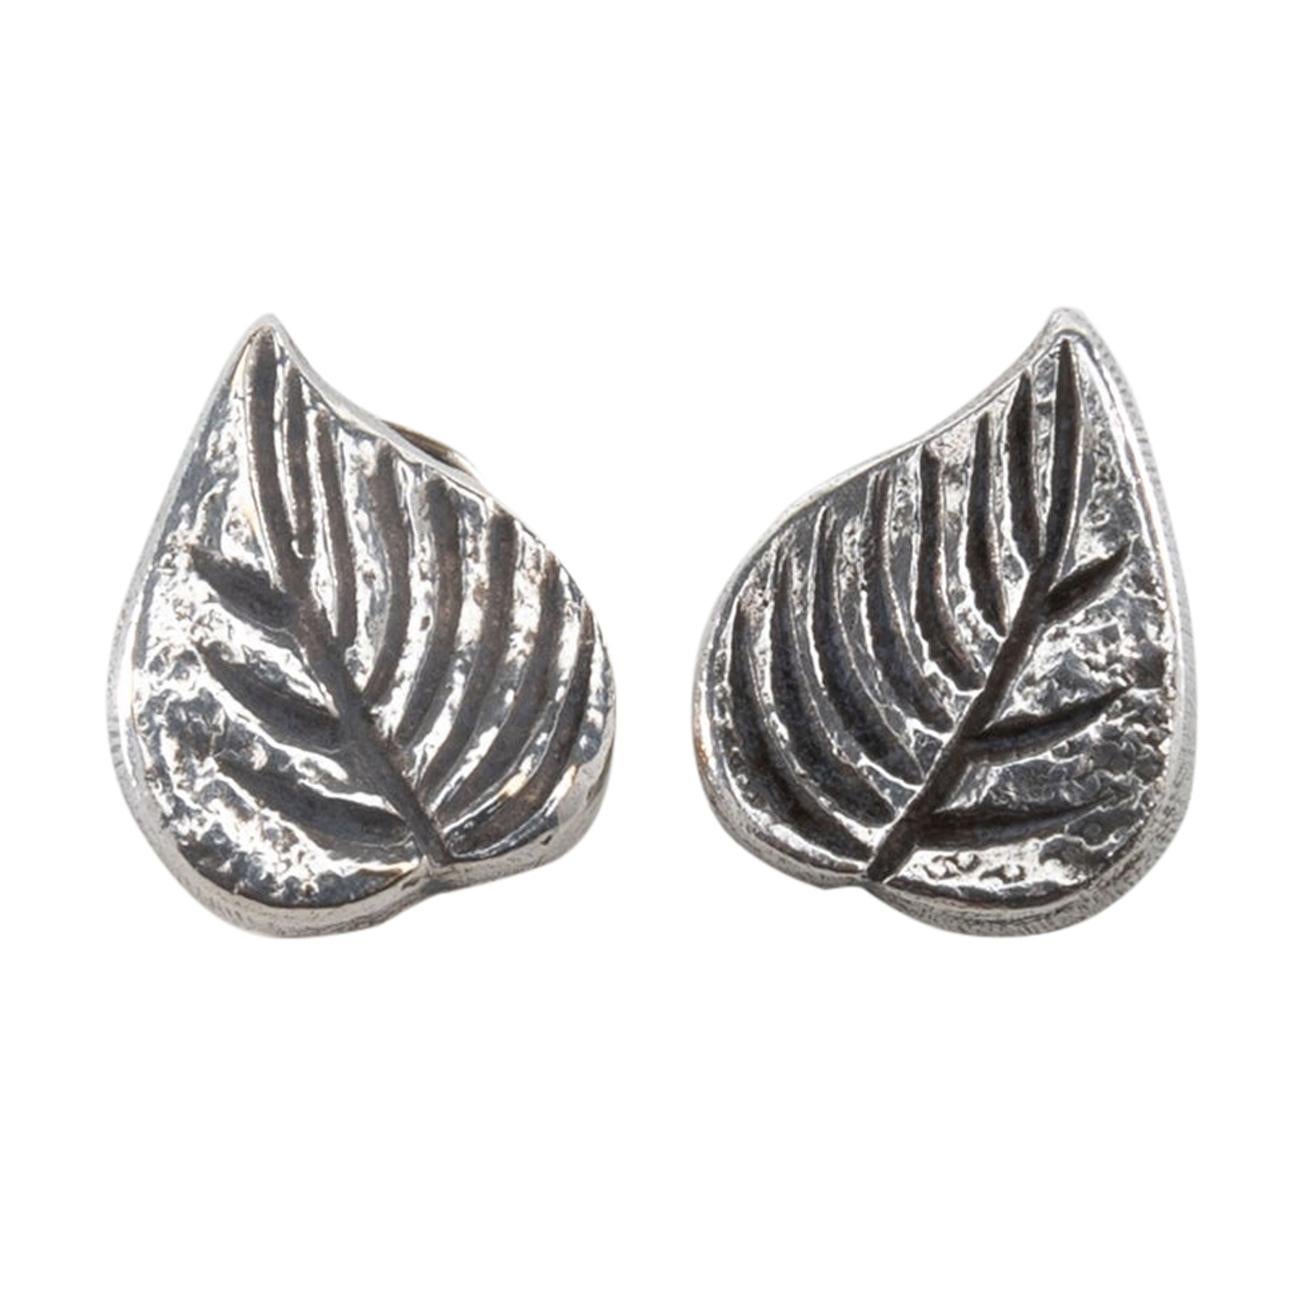 The Leaves, Pair of Earrings 'Clips' in Silvered Bronze, Line Vautrin 'France'